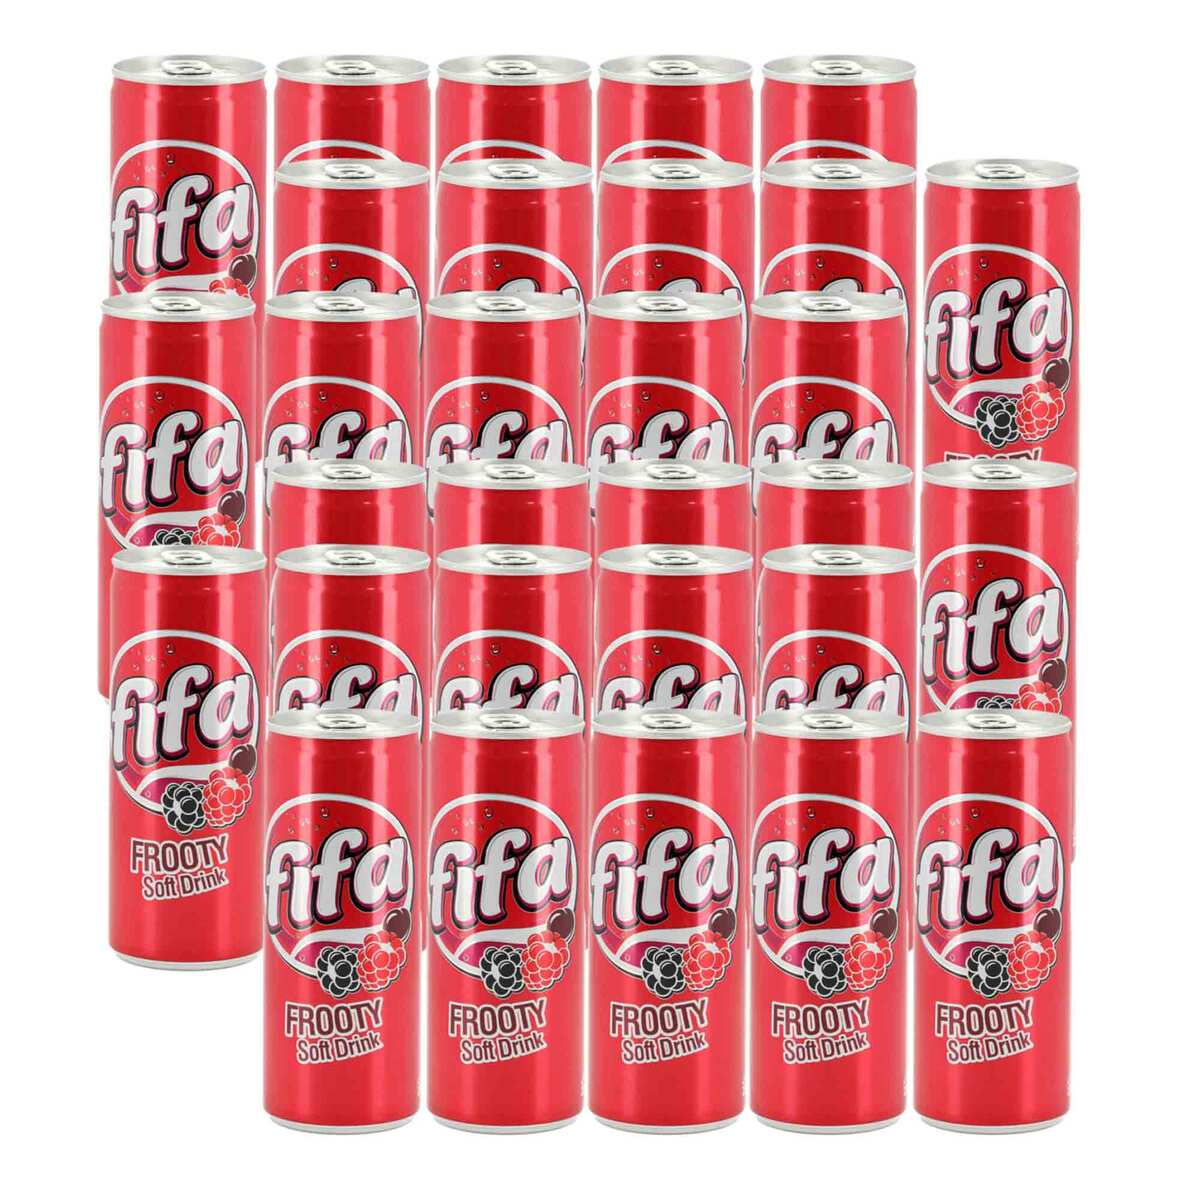 Fifa Frooty Soft Drink 250 ml